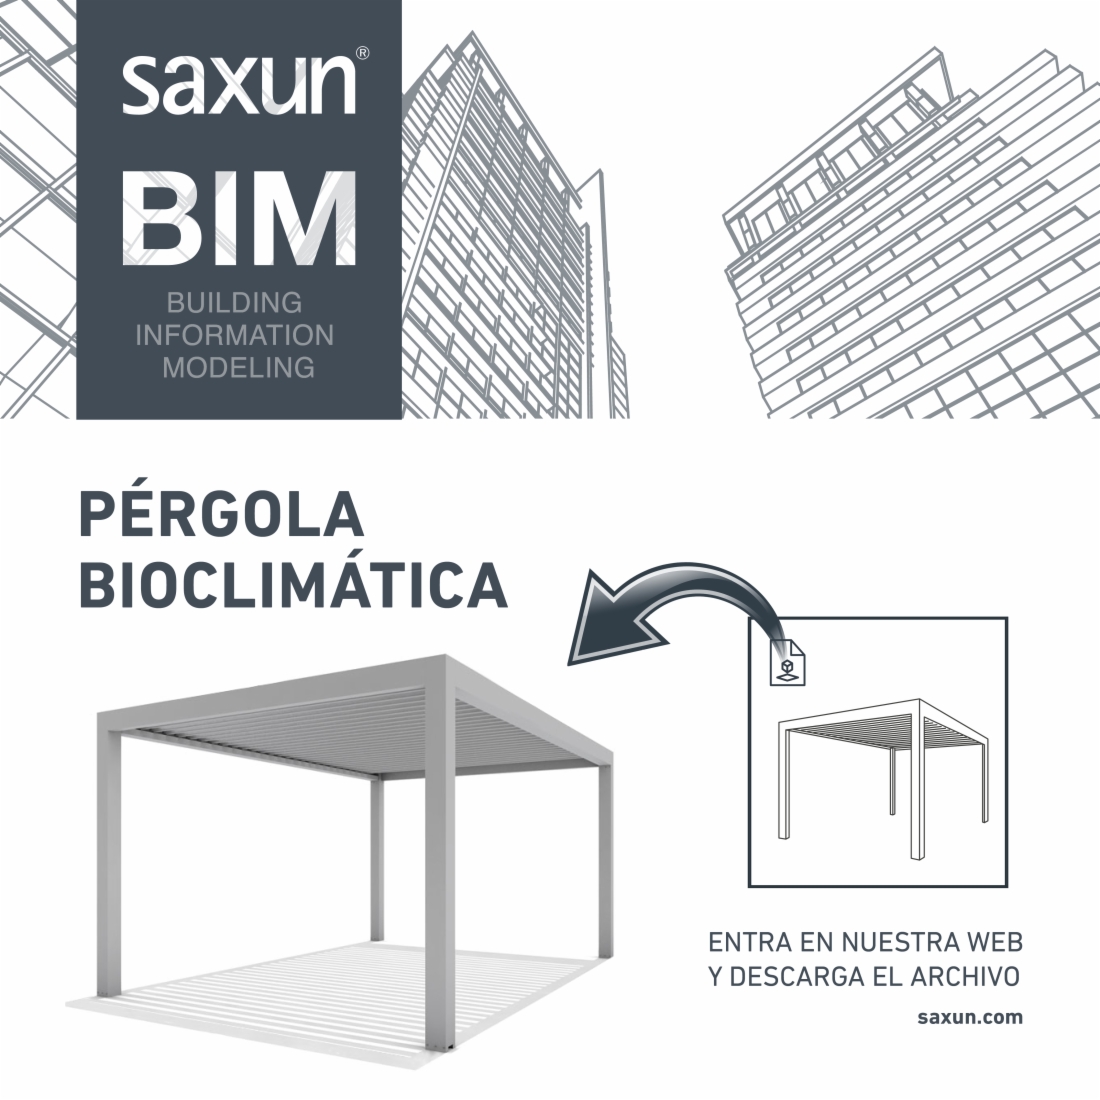 OUR BIOCLIMATIC PERGOLAS, NOW IN THE BIM LIBRARY.